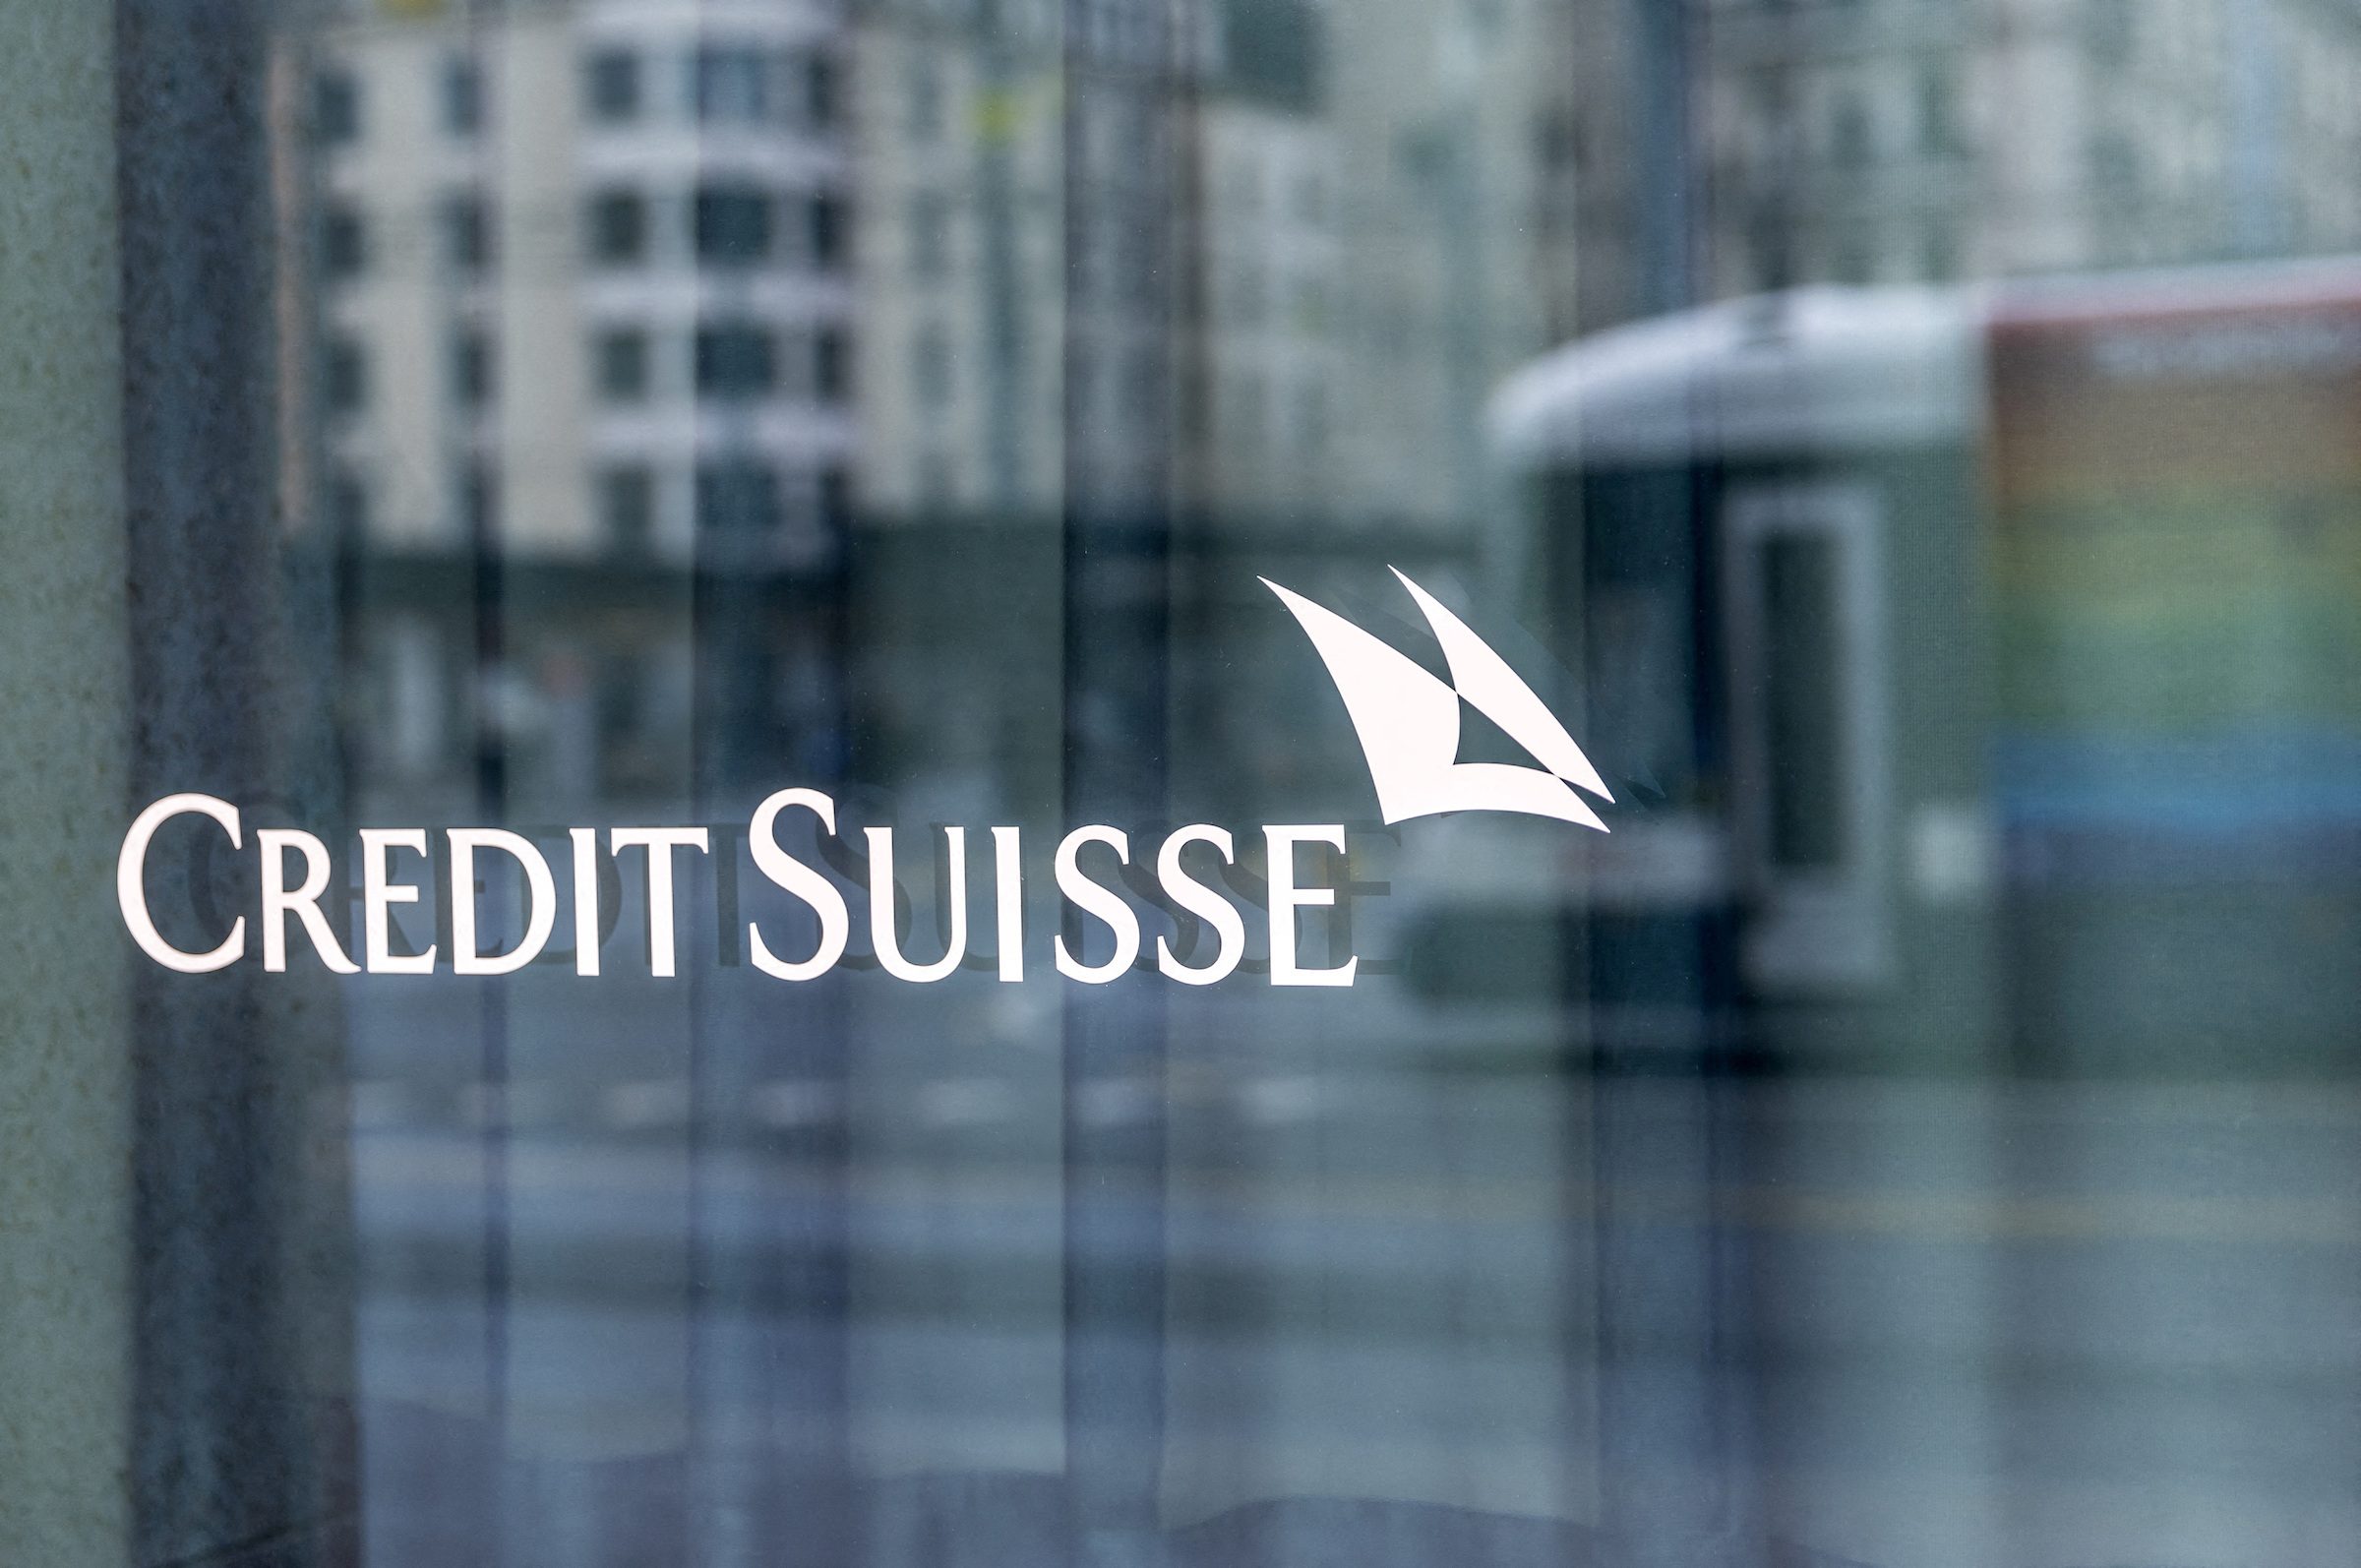 Credit Suisse delays annual report after US SEC call, shares drop